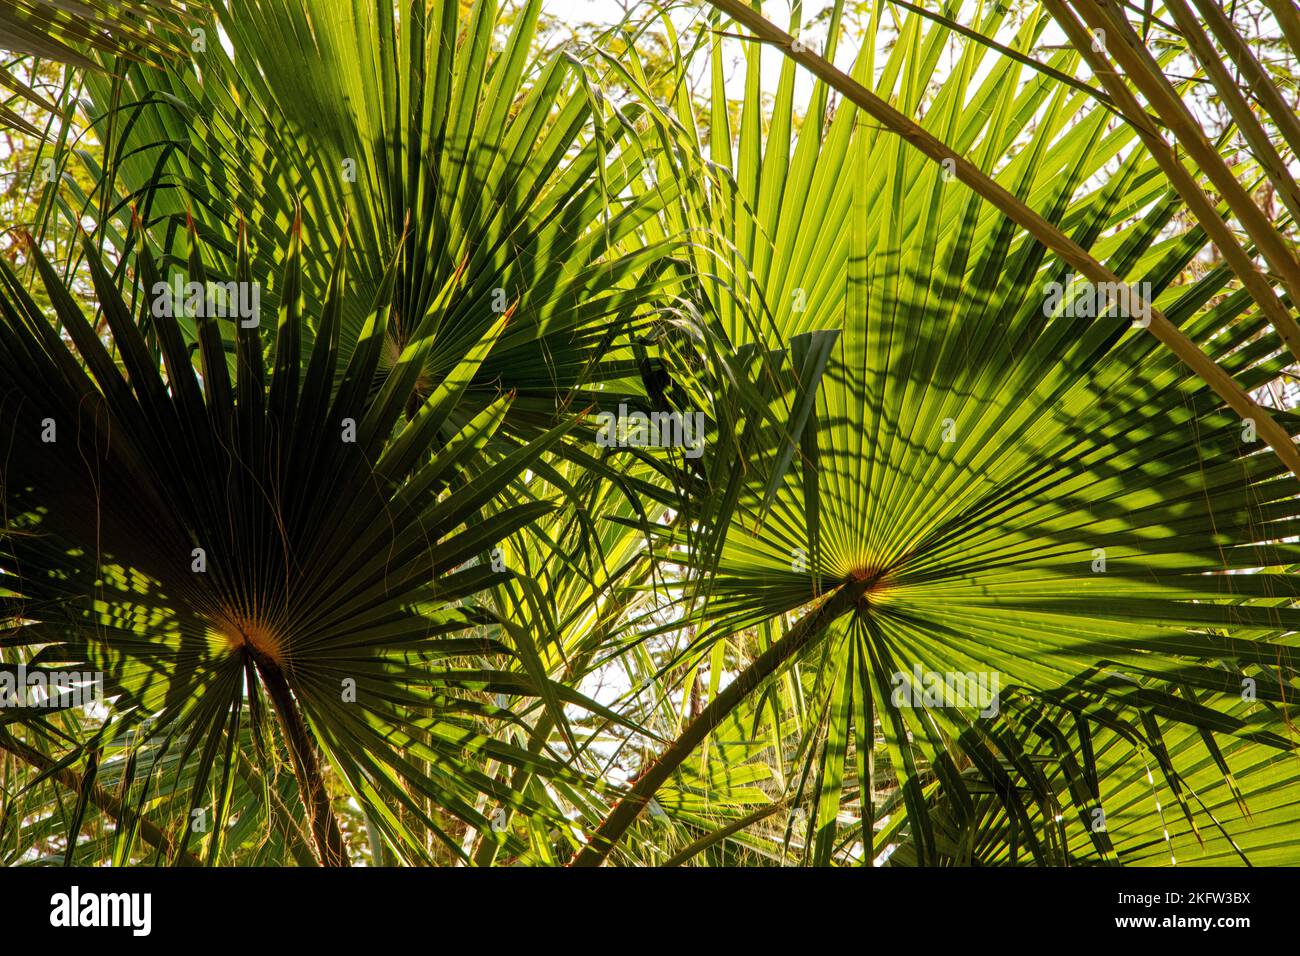 Near view of trunks and leaves of a palm tree in a warm land during holidays Stock Photo